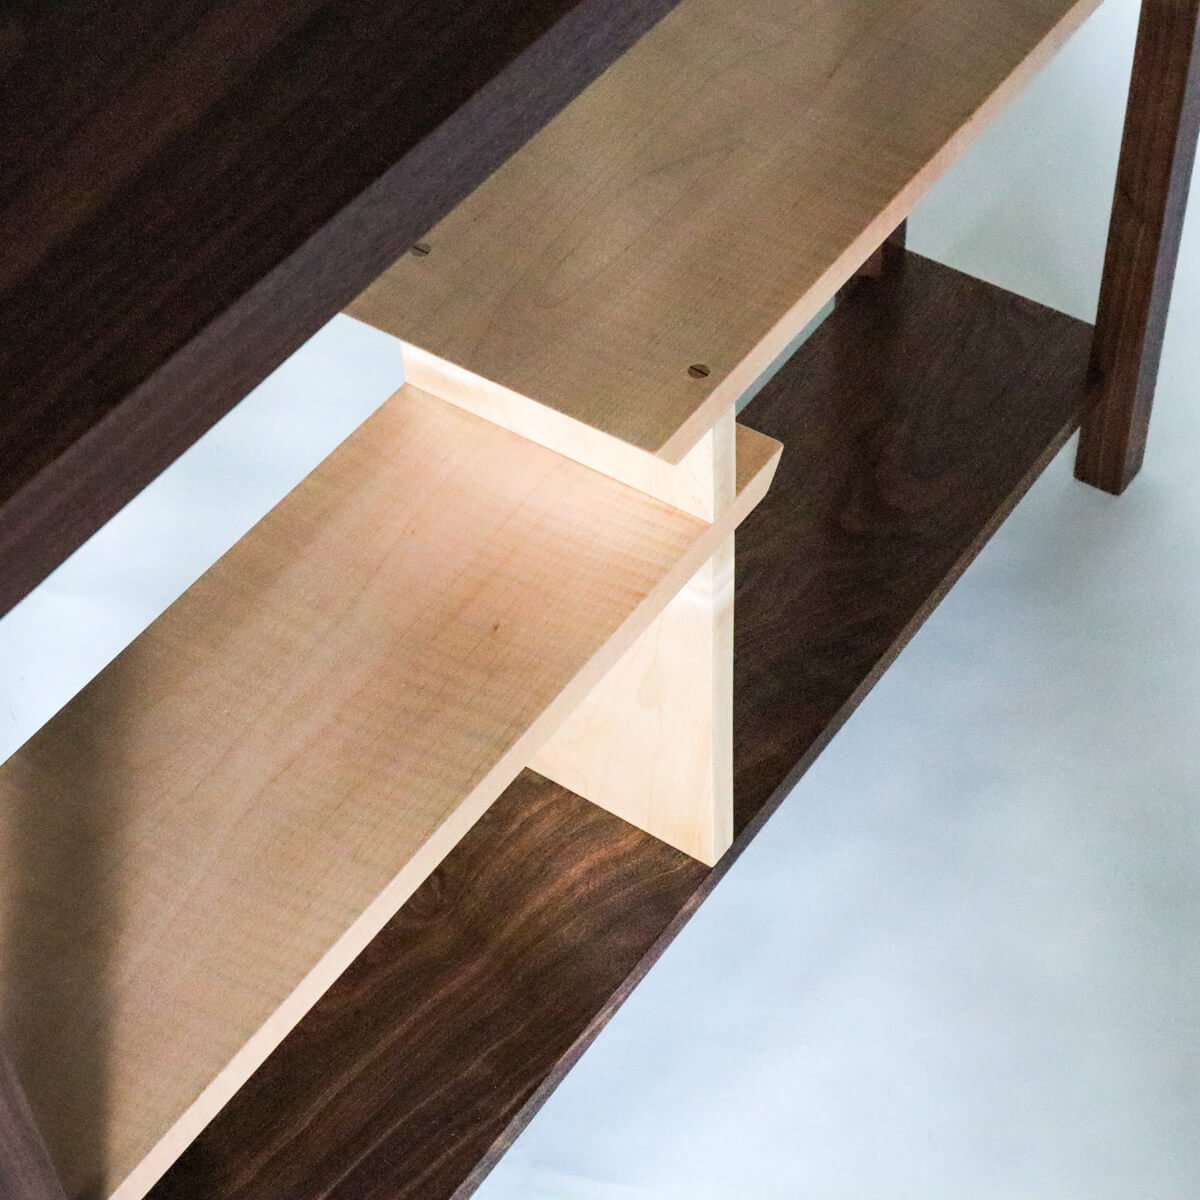 tiger maple display shelves on a narrow console table by Mokuzai Furniture